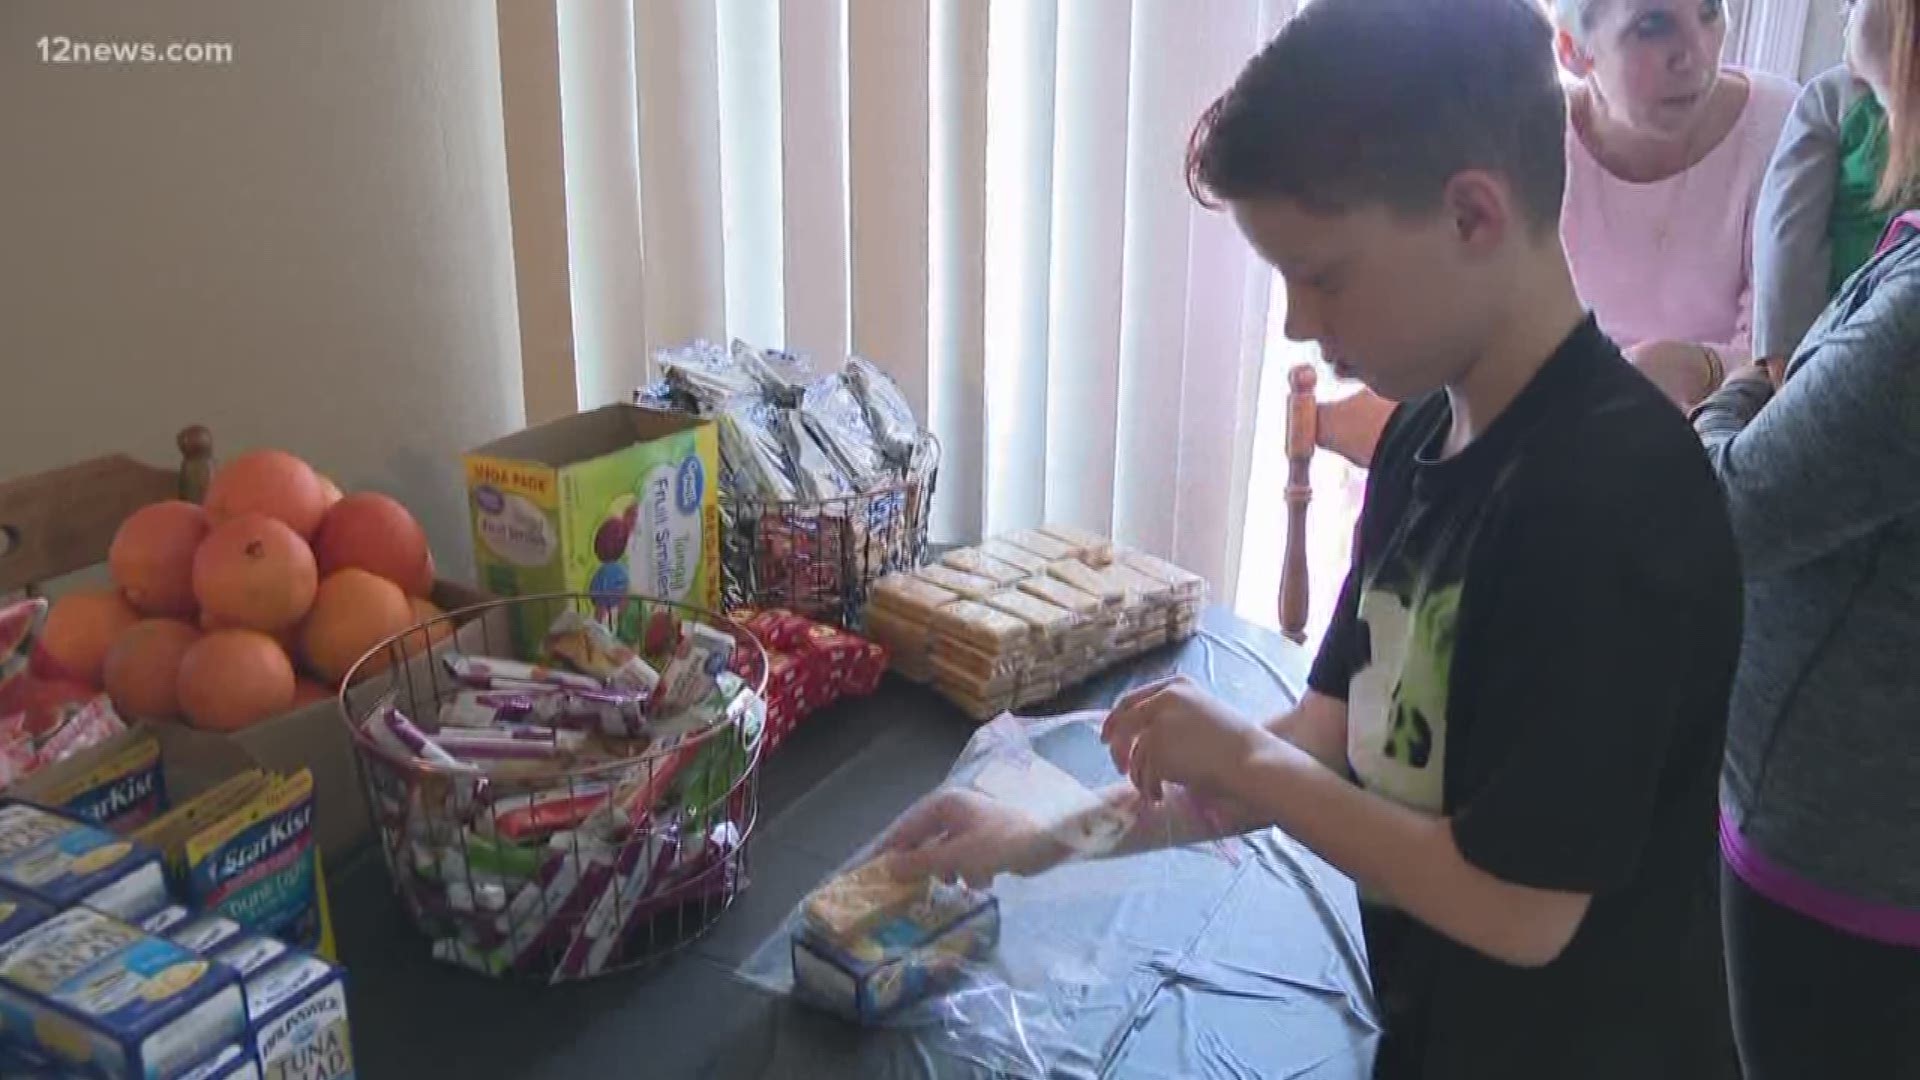 Instead of asking for toys or video games for his birthday this year, Kaleb Carll asked his family and friends to bring deodorant, socks, blankets and non-perishable foods to his party to make care packages for homeless people.